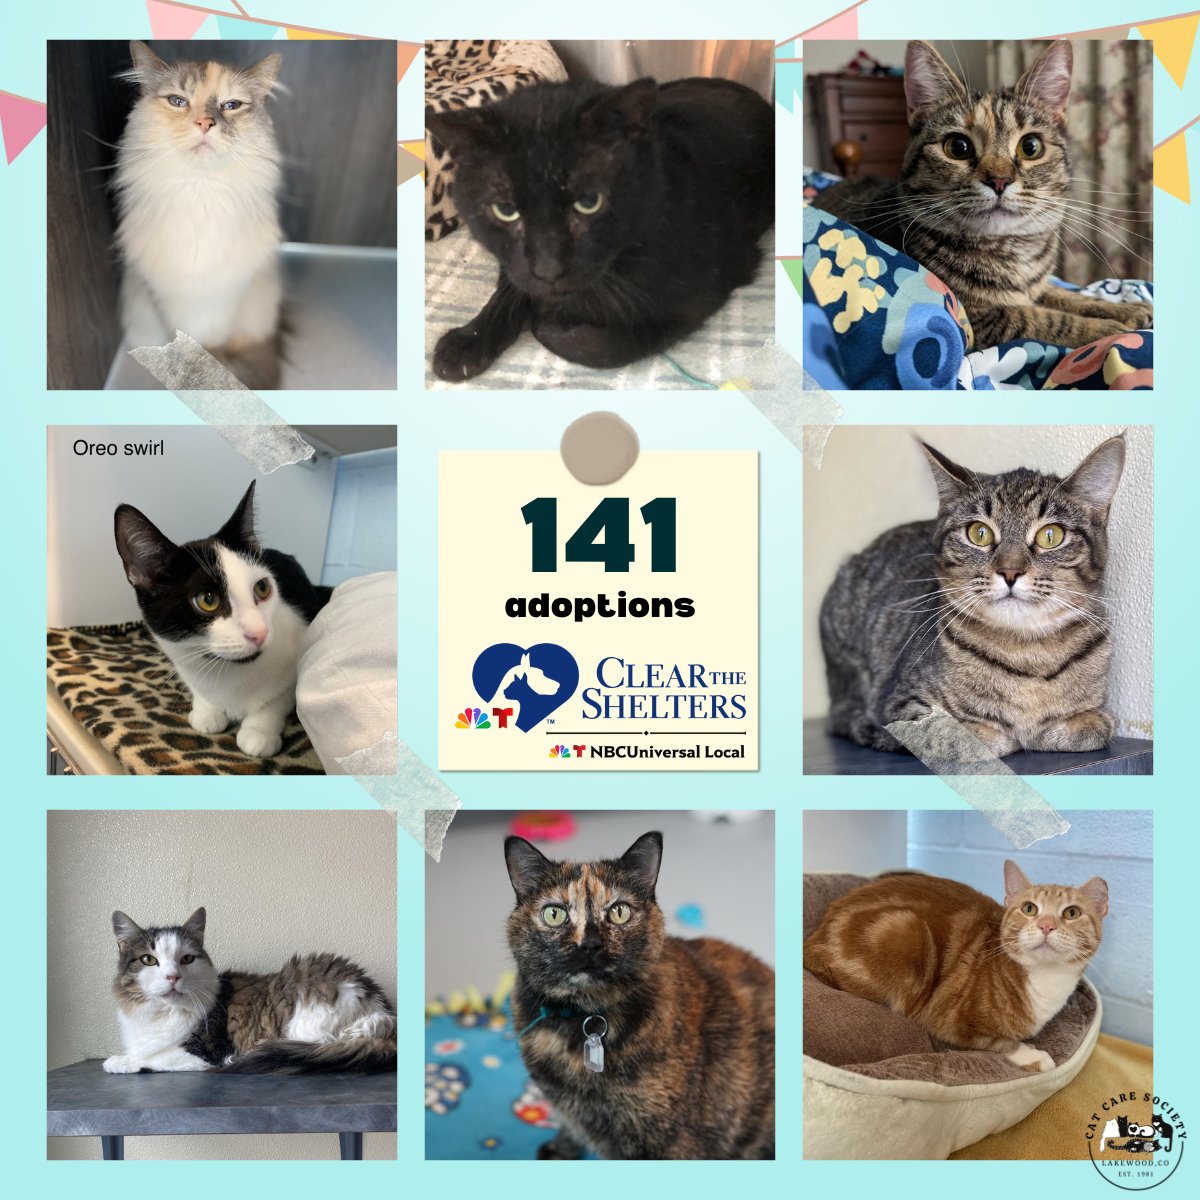 WOW, once again. We closed out August with 141 cats finding new loving homes. THANK YOU to each individual who opened their home to a new friend. We are so happy that our community of cat lovers helped us have an amazing #cleartheshelters month 😻 @ClearTheShelter